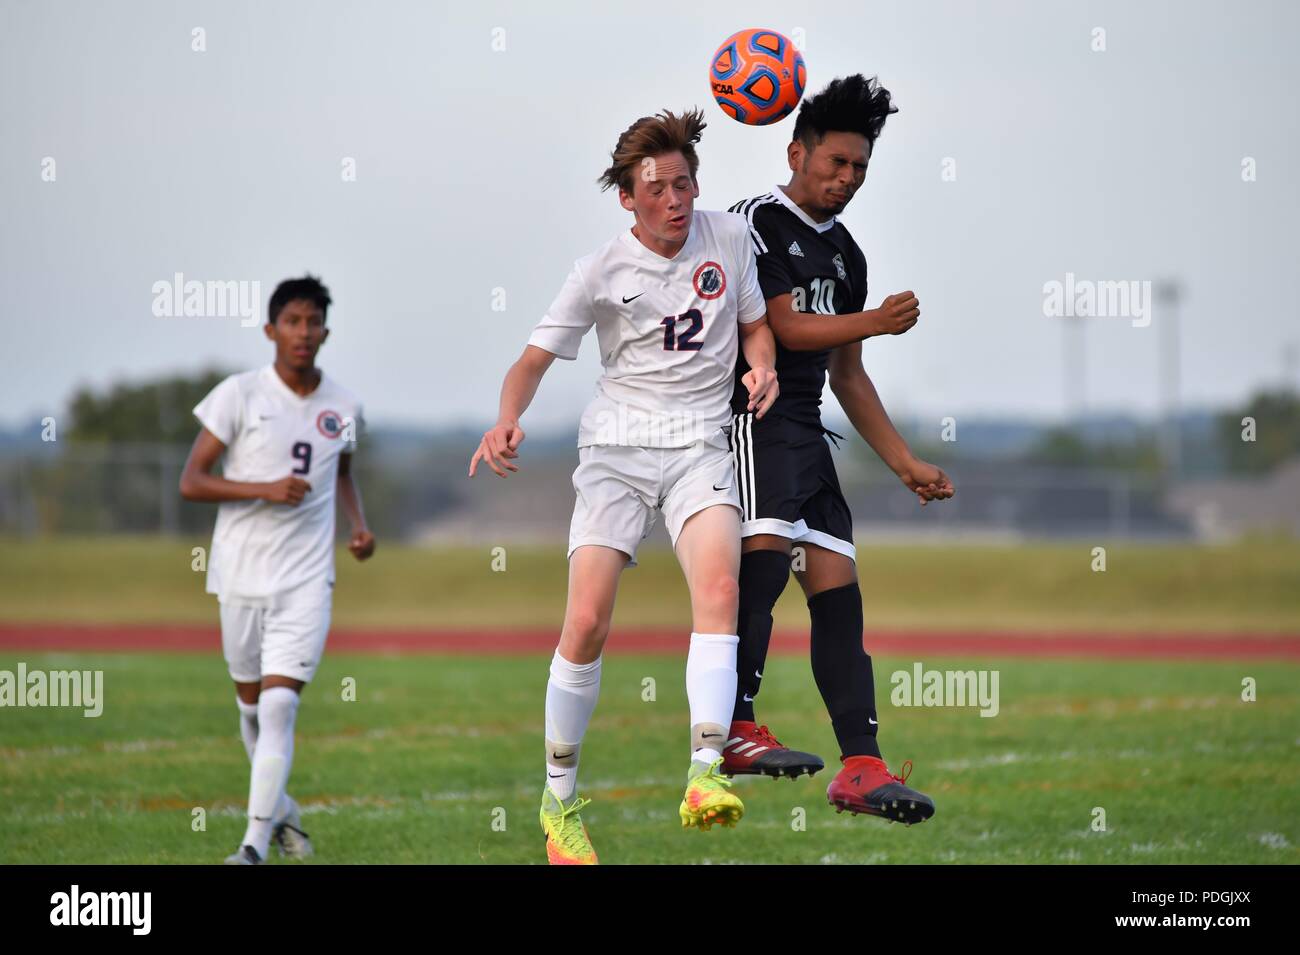 Player making contact while battling to execute a header. USA. Stock Photo